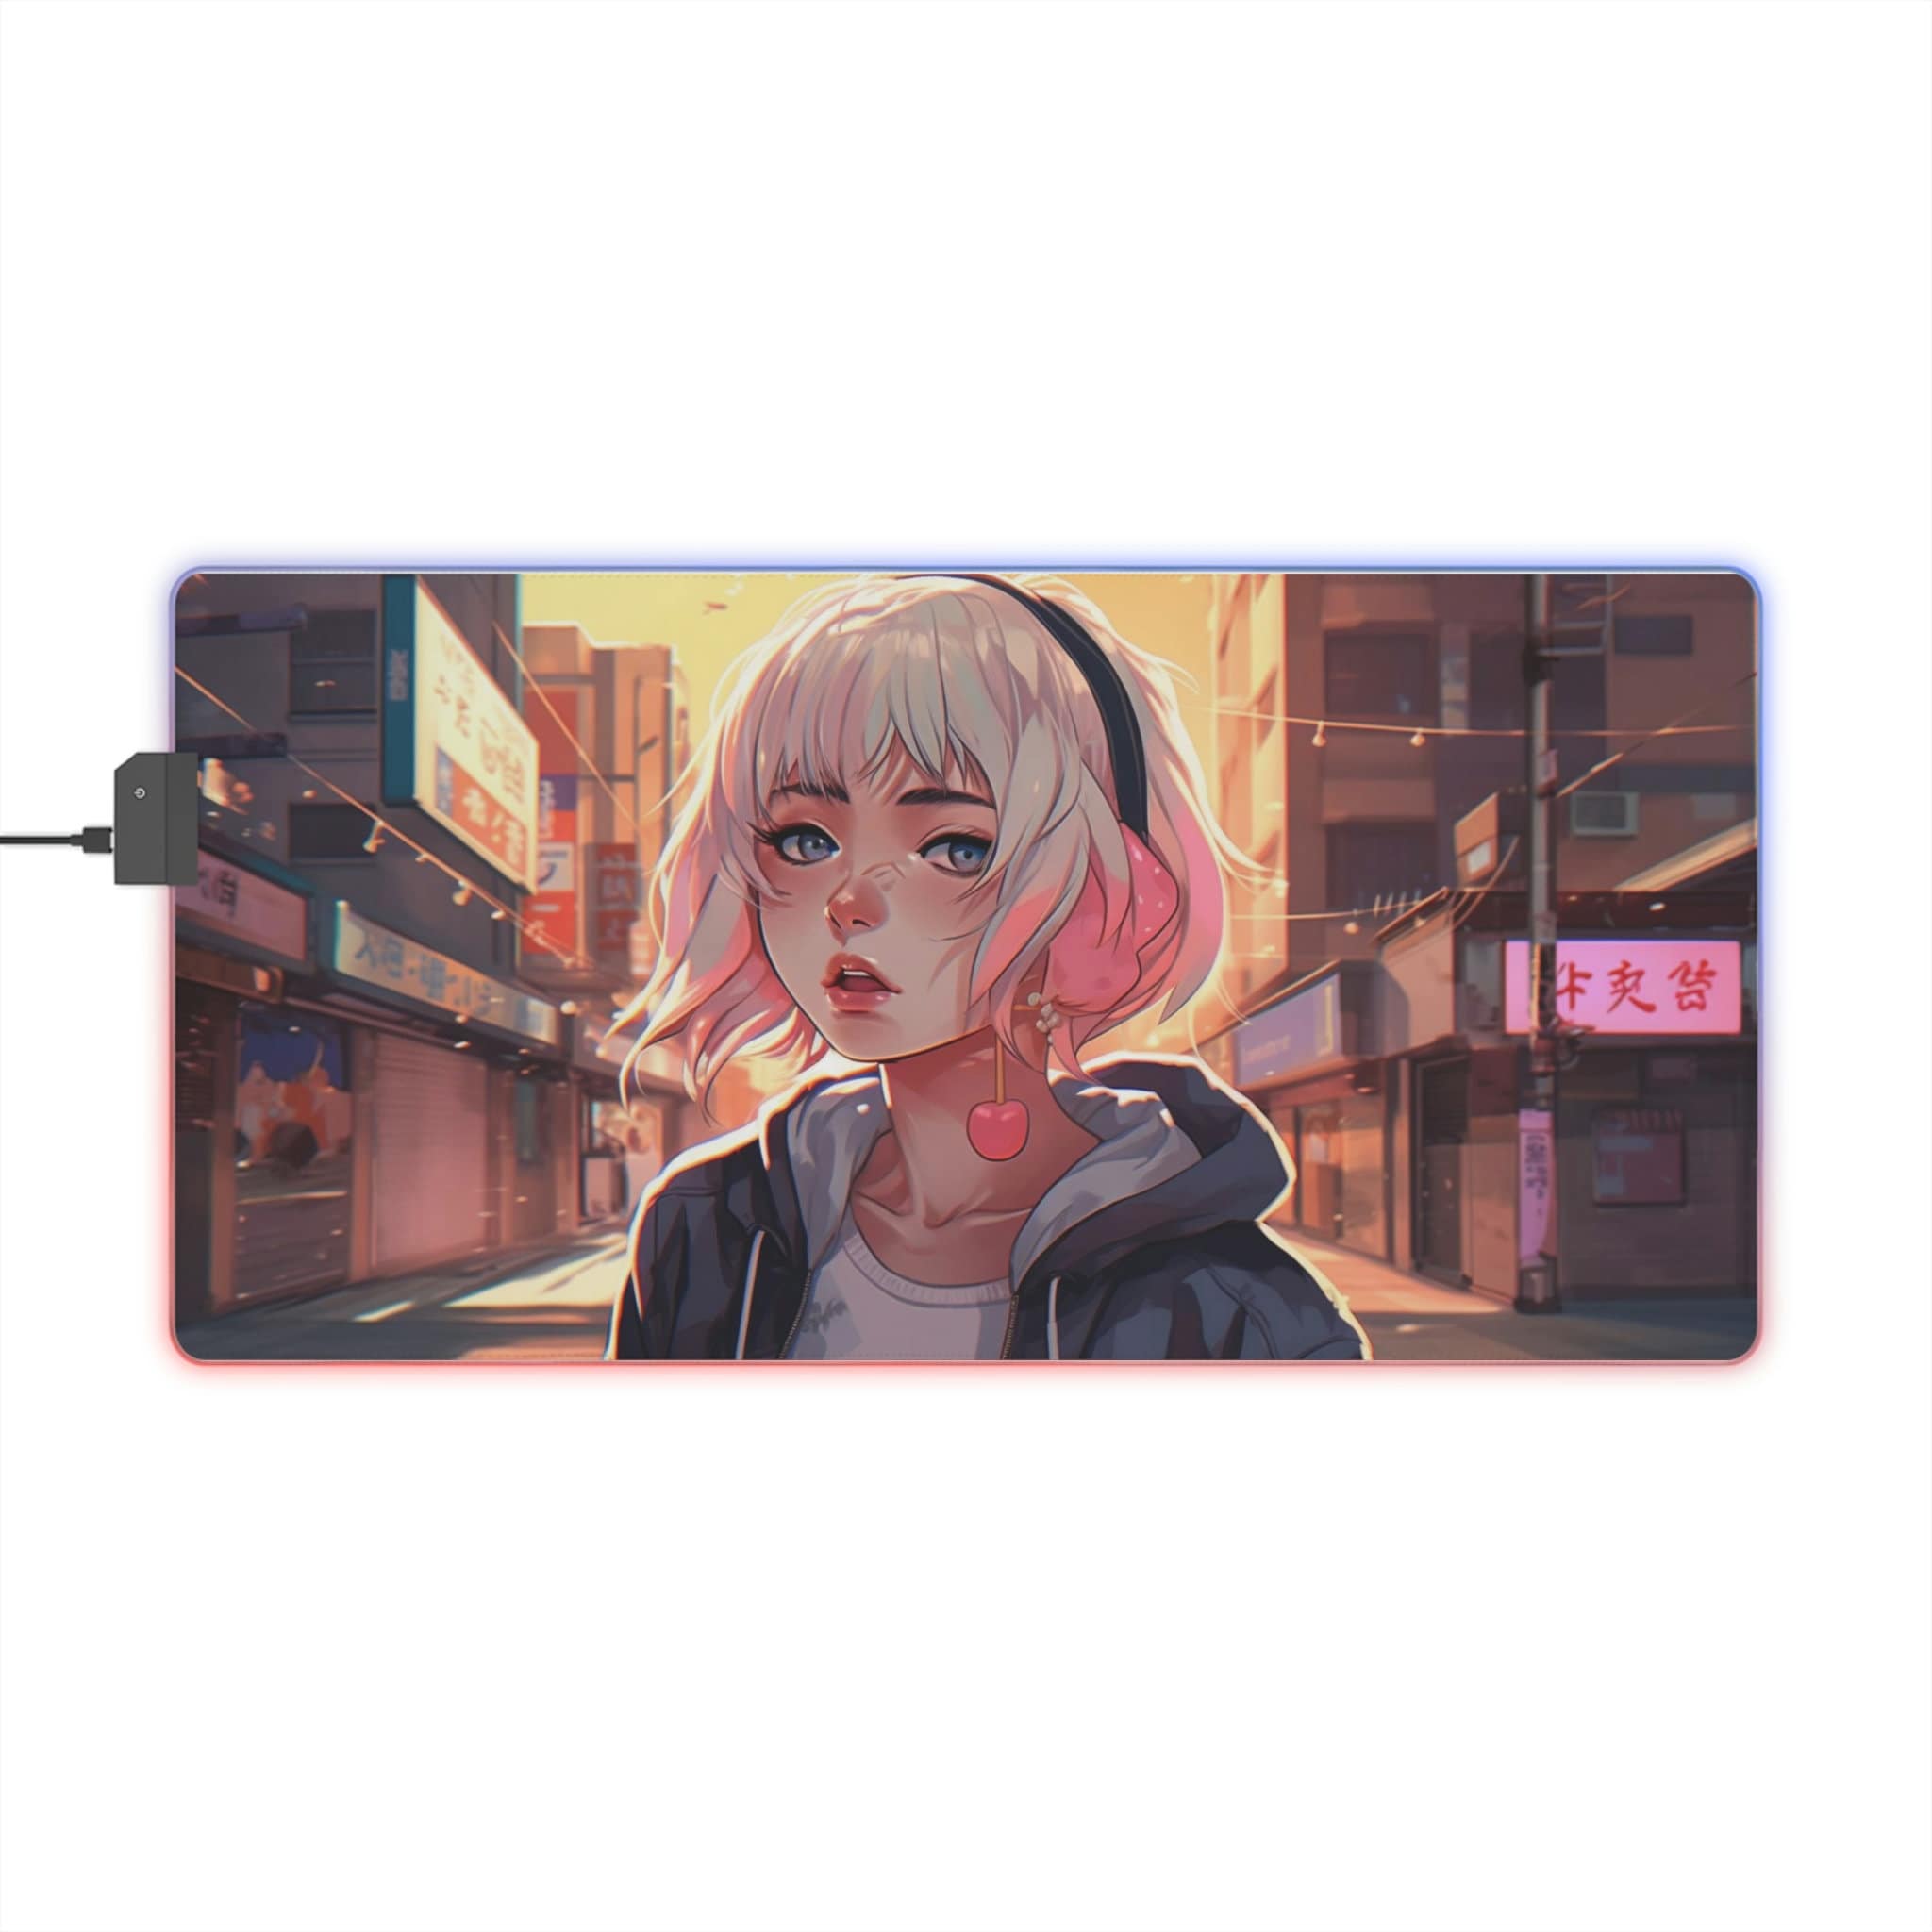 Anime Girls Vocaloid Hatsune Miku Cyberpunk Gaming Mouse Pad Desk Mat  NonSlip Rubber Stitched Edges 4 Size  Amazonin Computers  Accessories